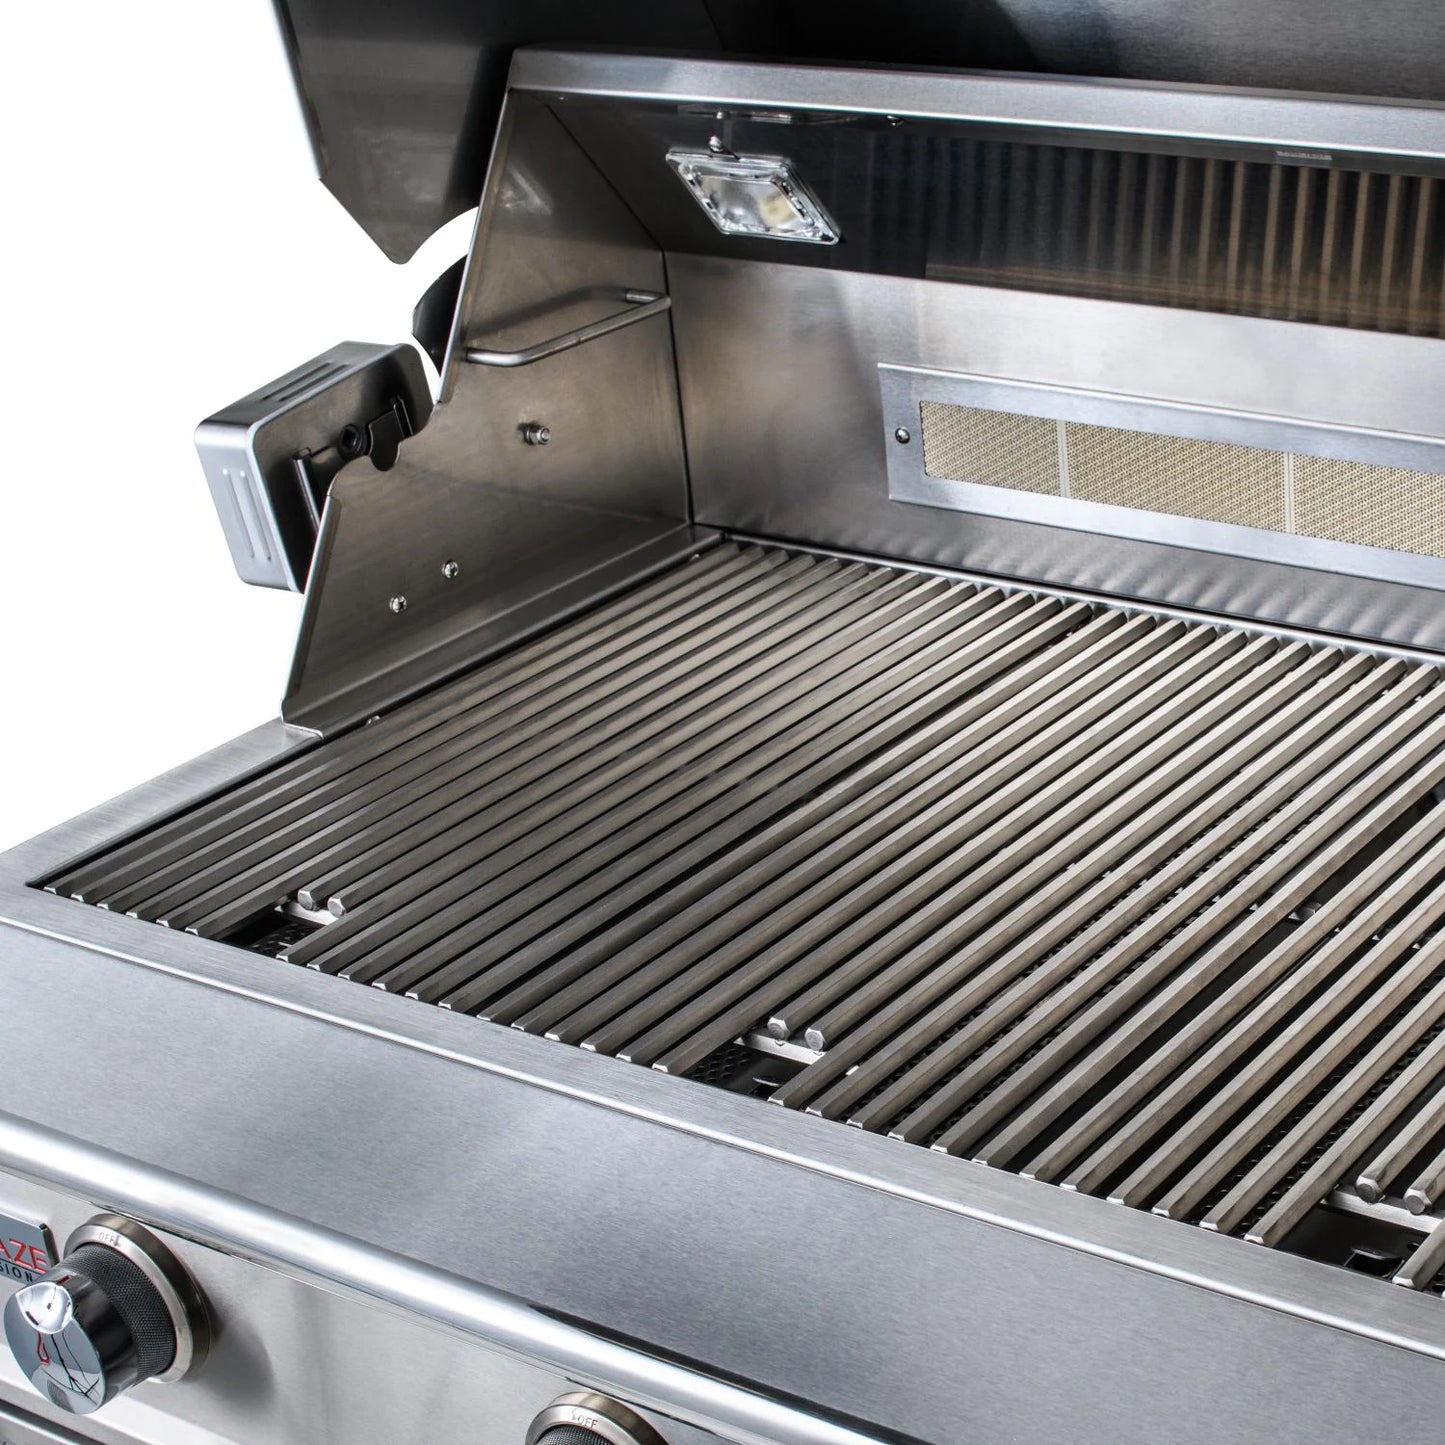 Blaze Professional LUX 34-Inch 3-Burner Built-In Grill With Rear Infrared Burner - BLZ-3PRO